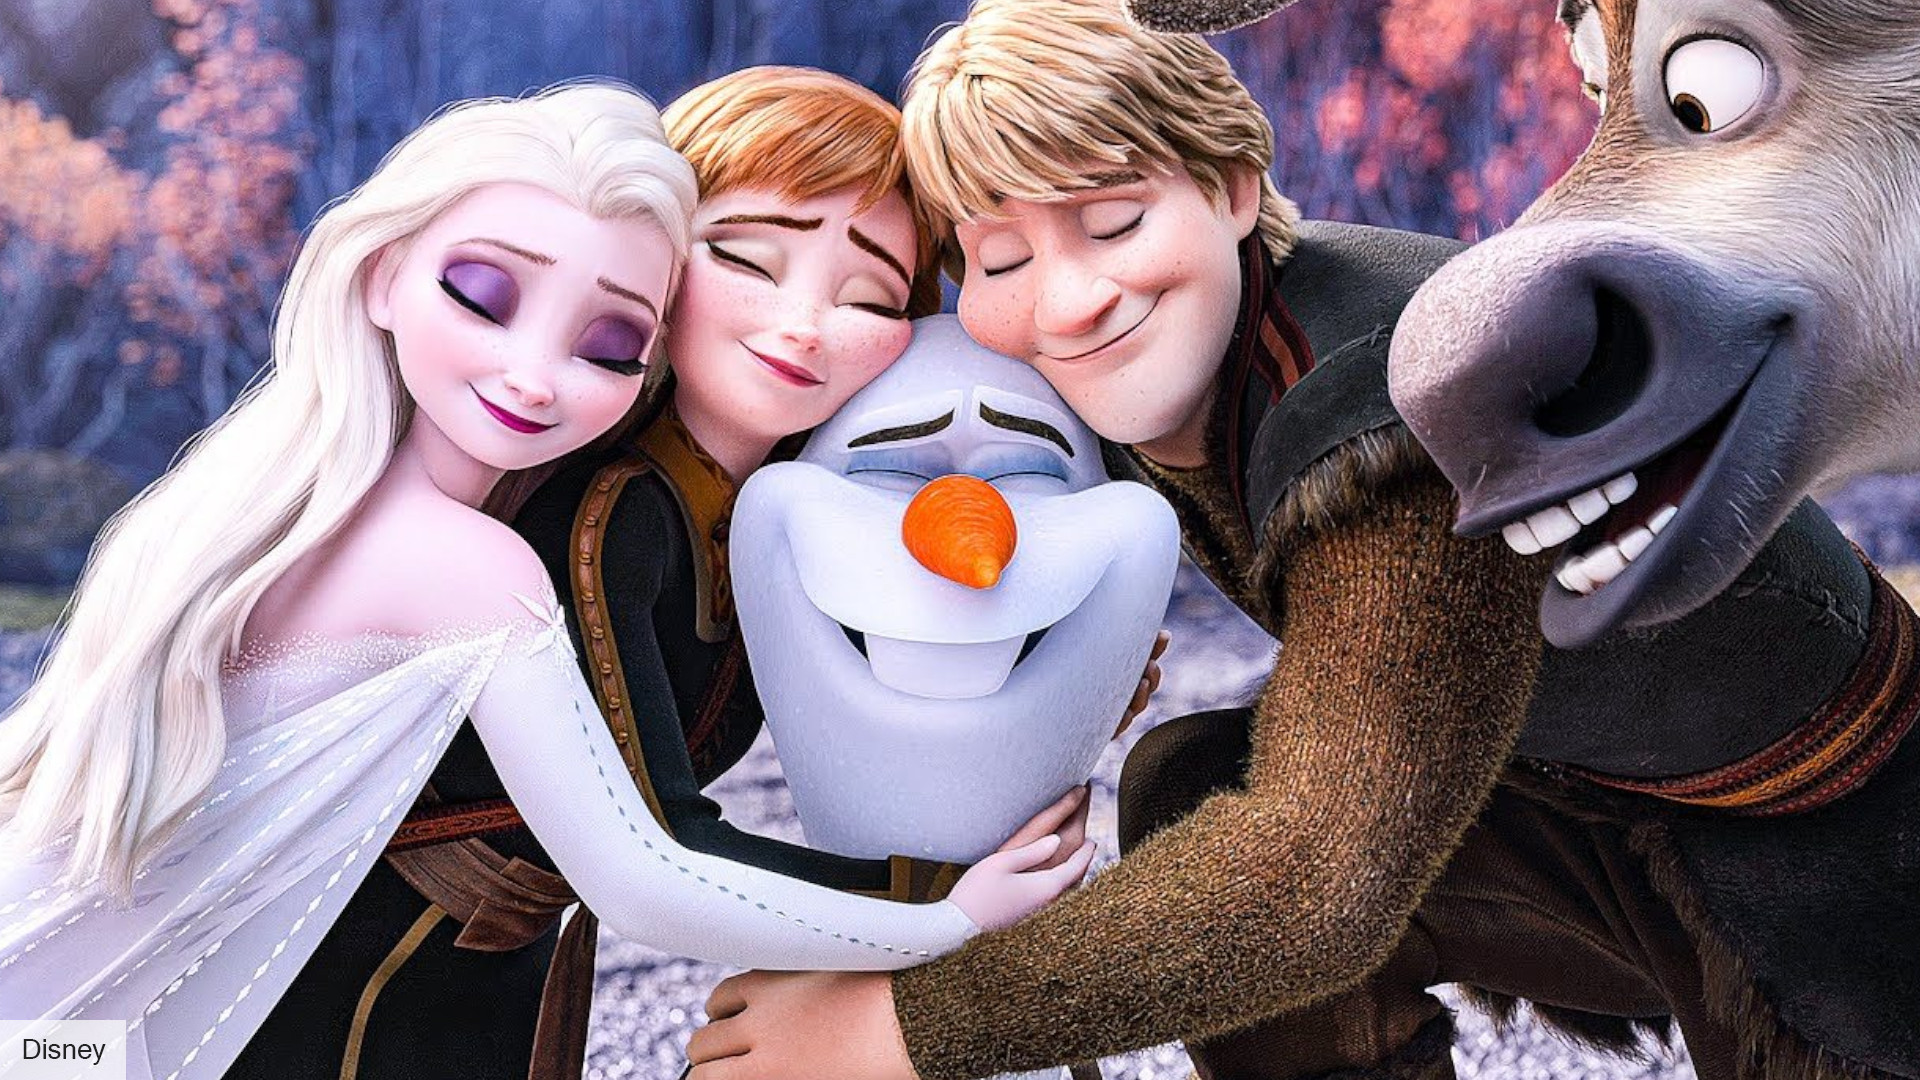 Frozen 3: Release Date, Cast, Story, And More Updates. - Interviewer PR